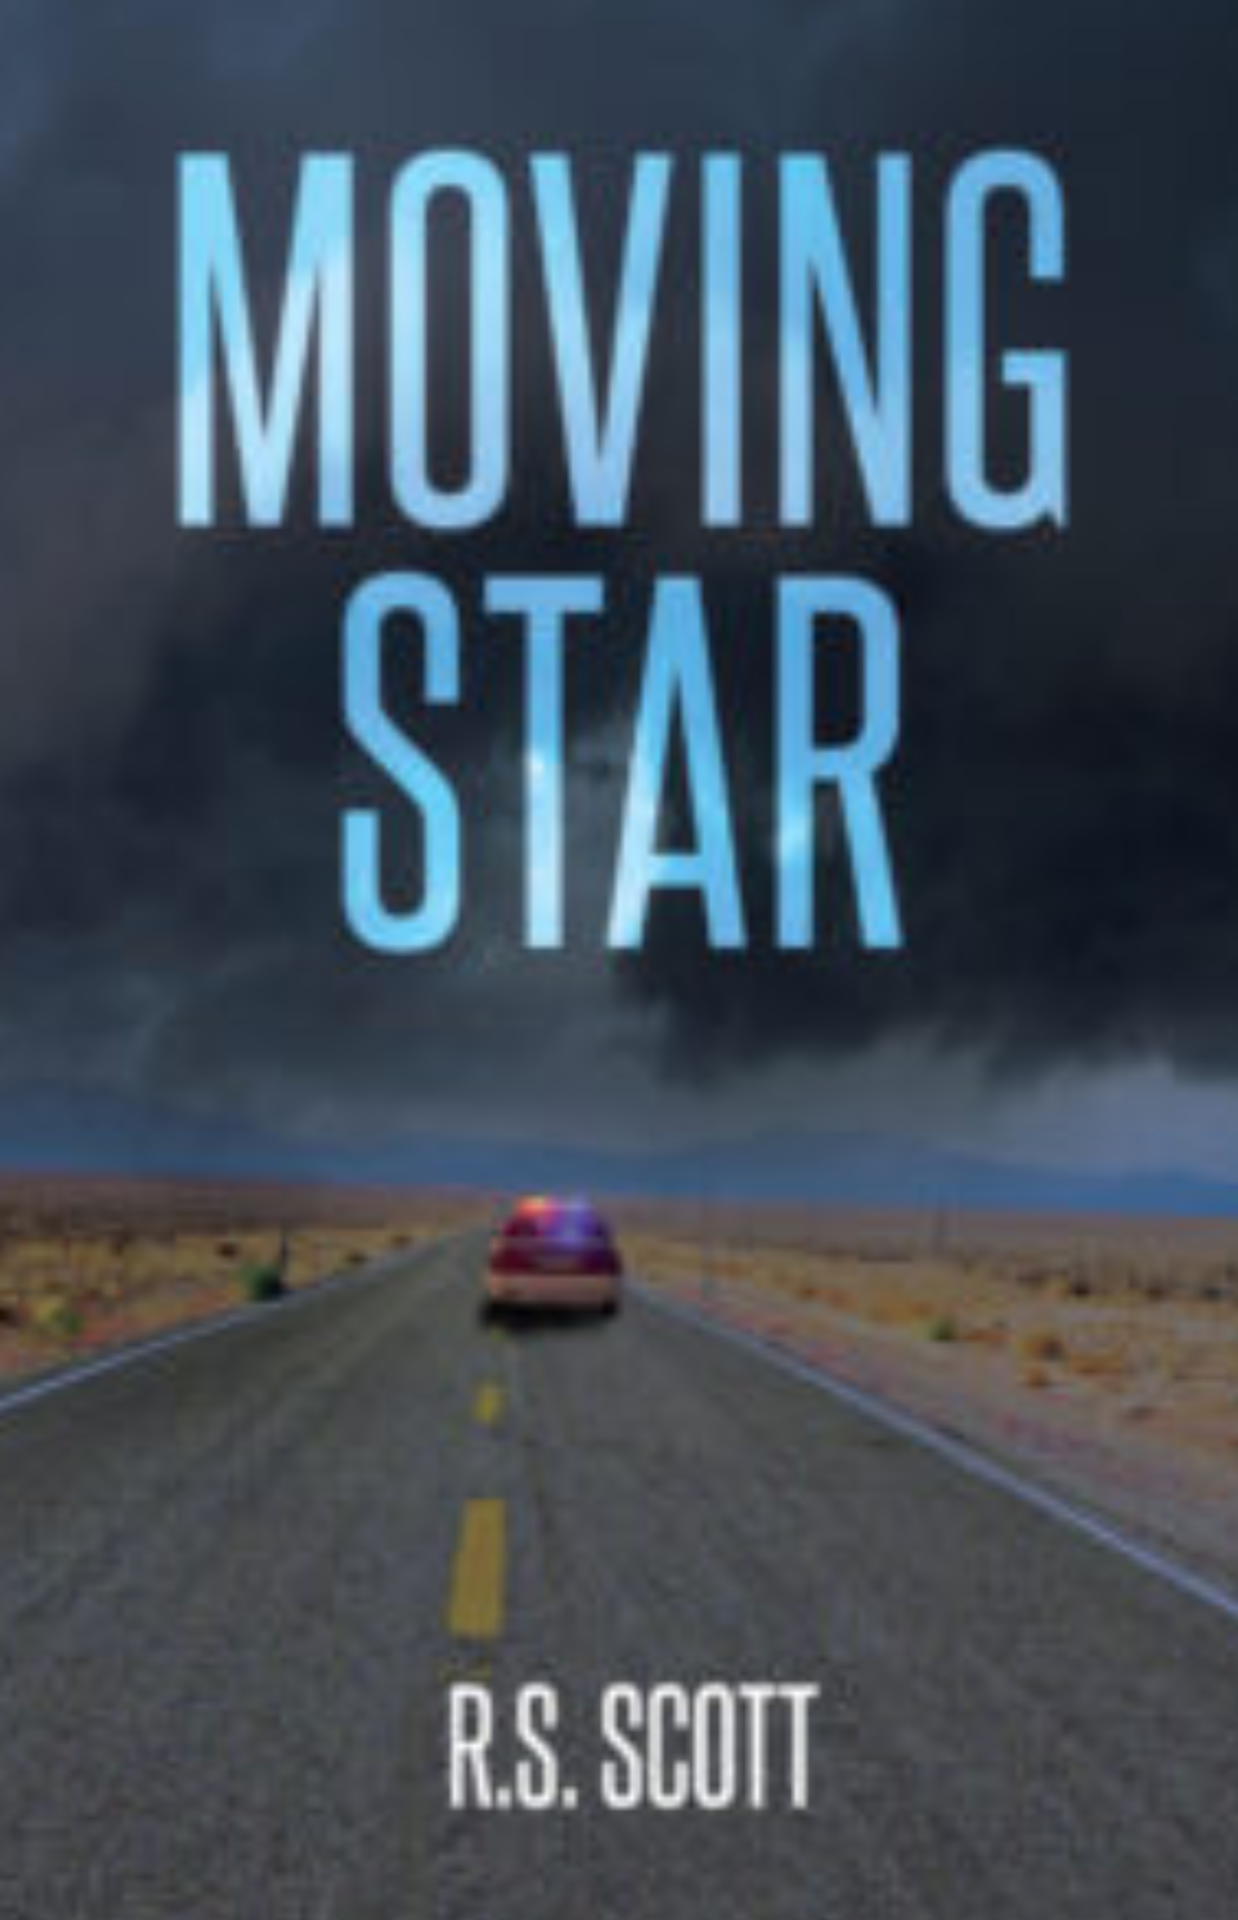 Moving Star by R.S. Scott book cover